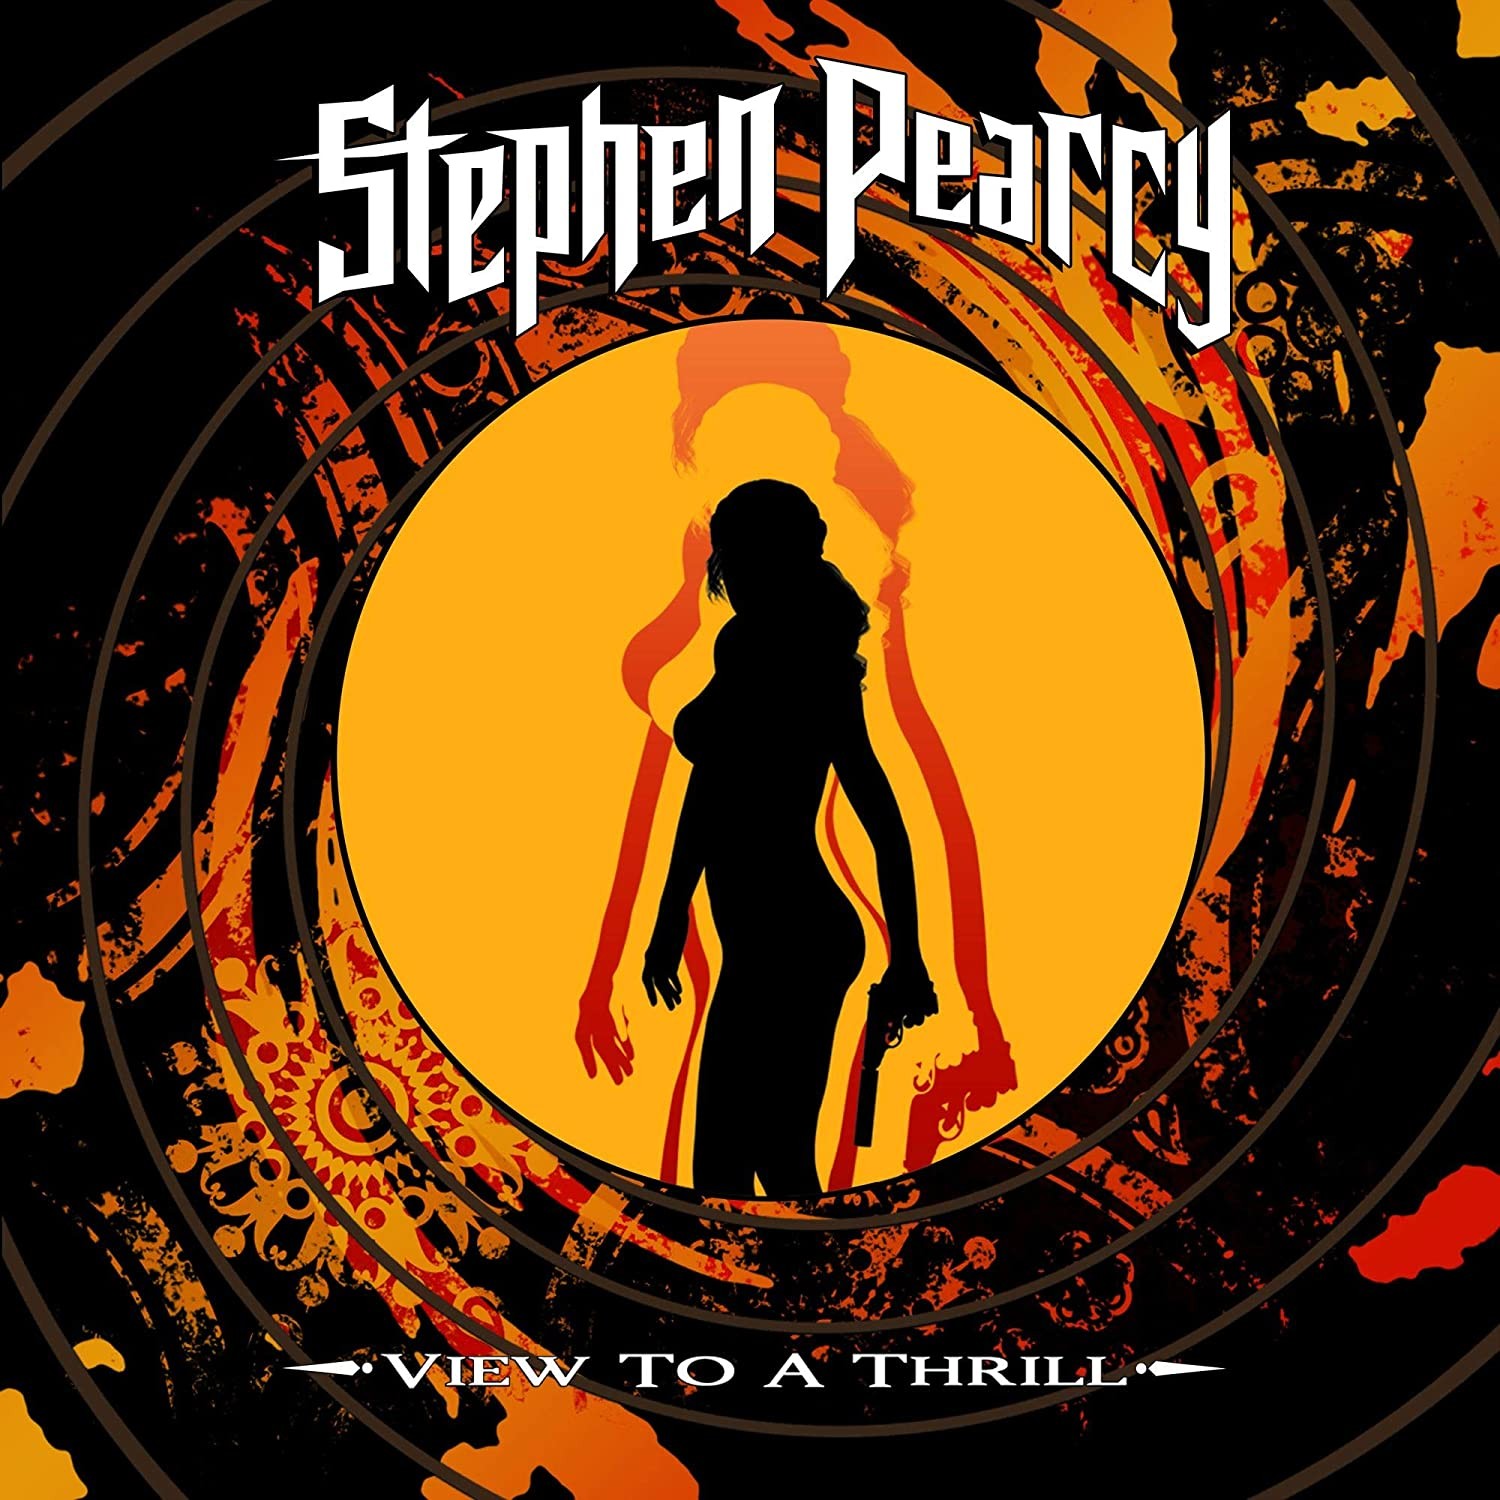 Stephen Pearcy - View To A Thrill (2018) - Vinyl